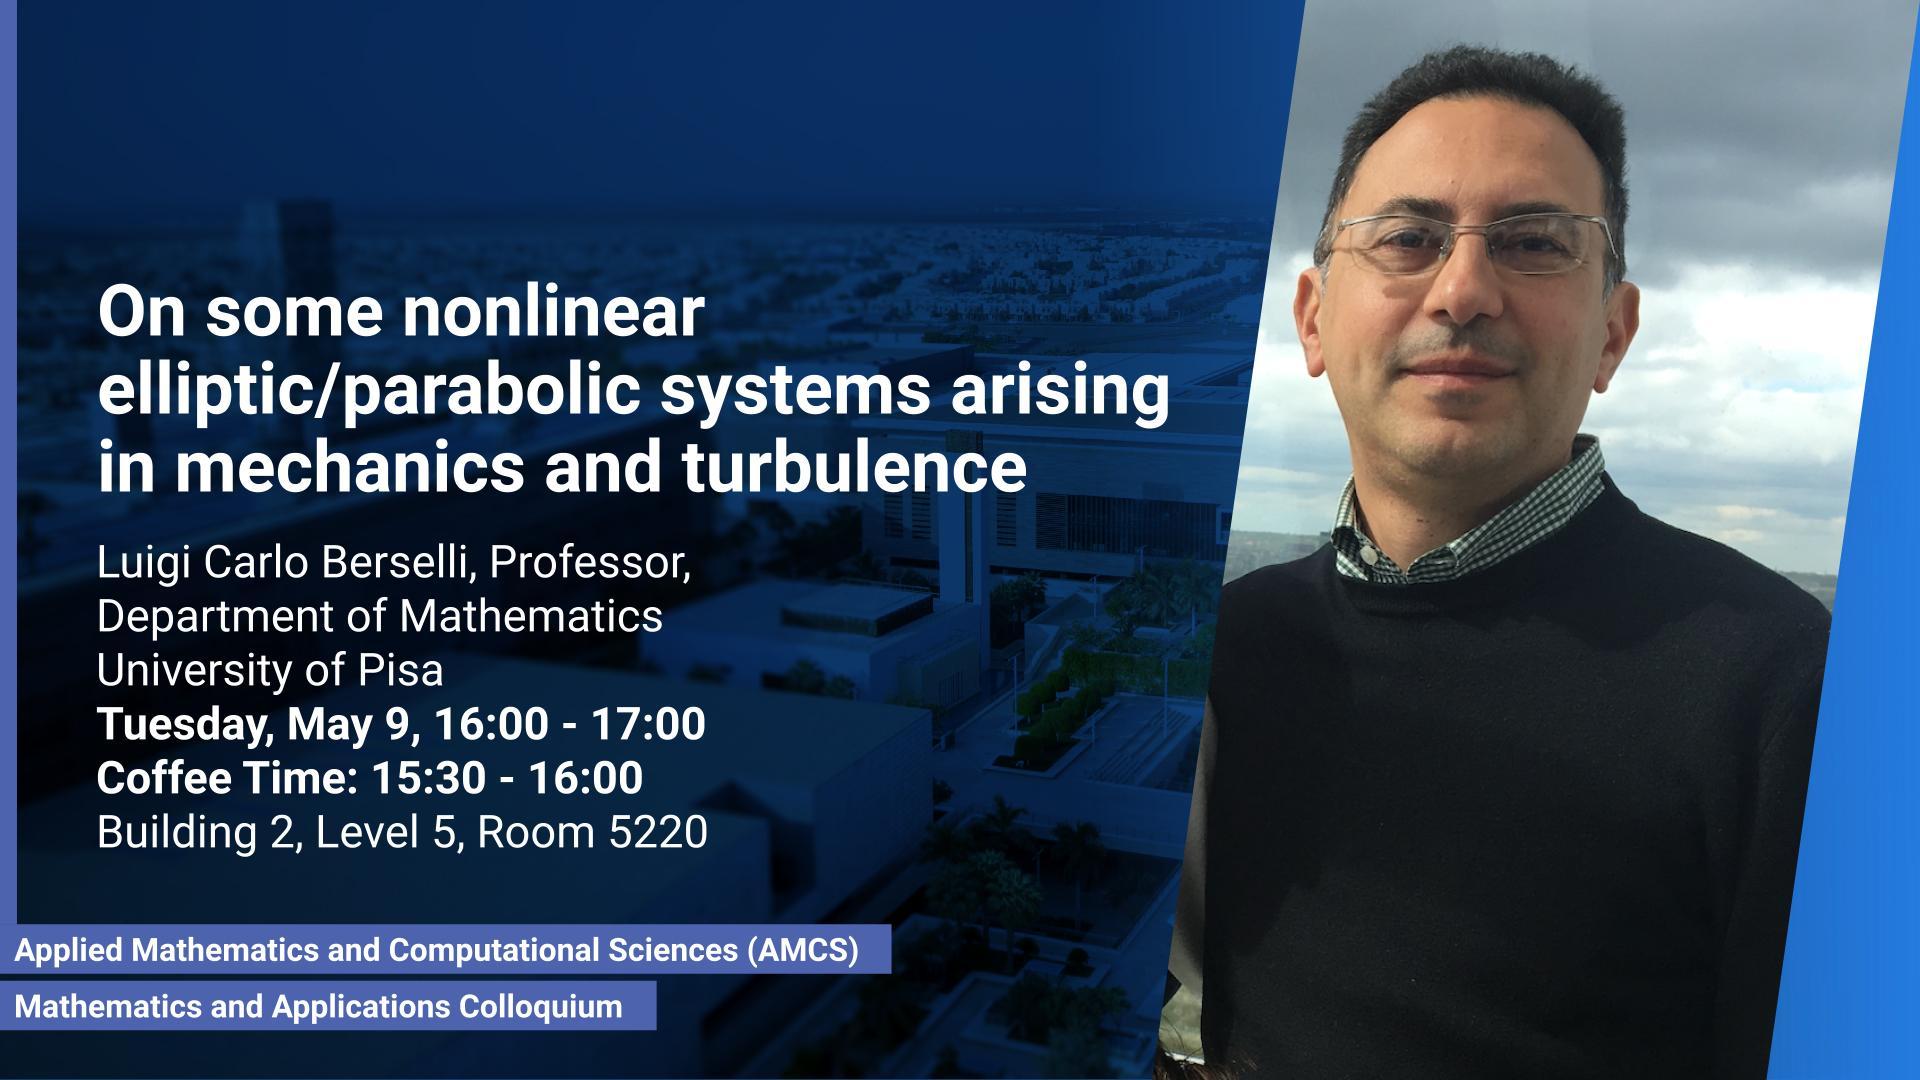 KAUST-CEMSE-AMCS-Mathematics-and-Applocation-Colloquium-On-some-nonlinear-elliptic_parabolic-systems-arising-in-mechanics-and-turbulence